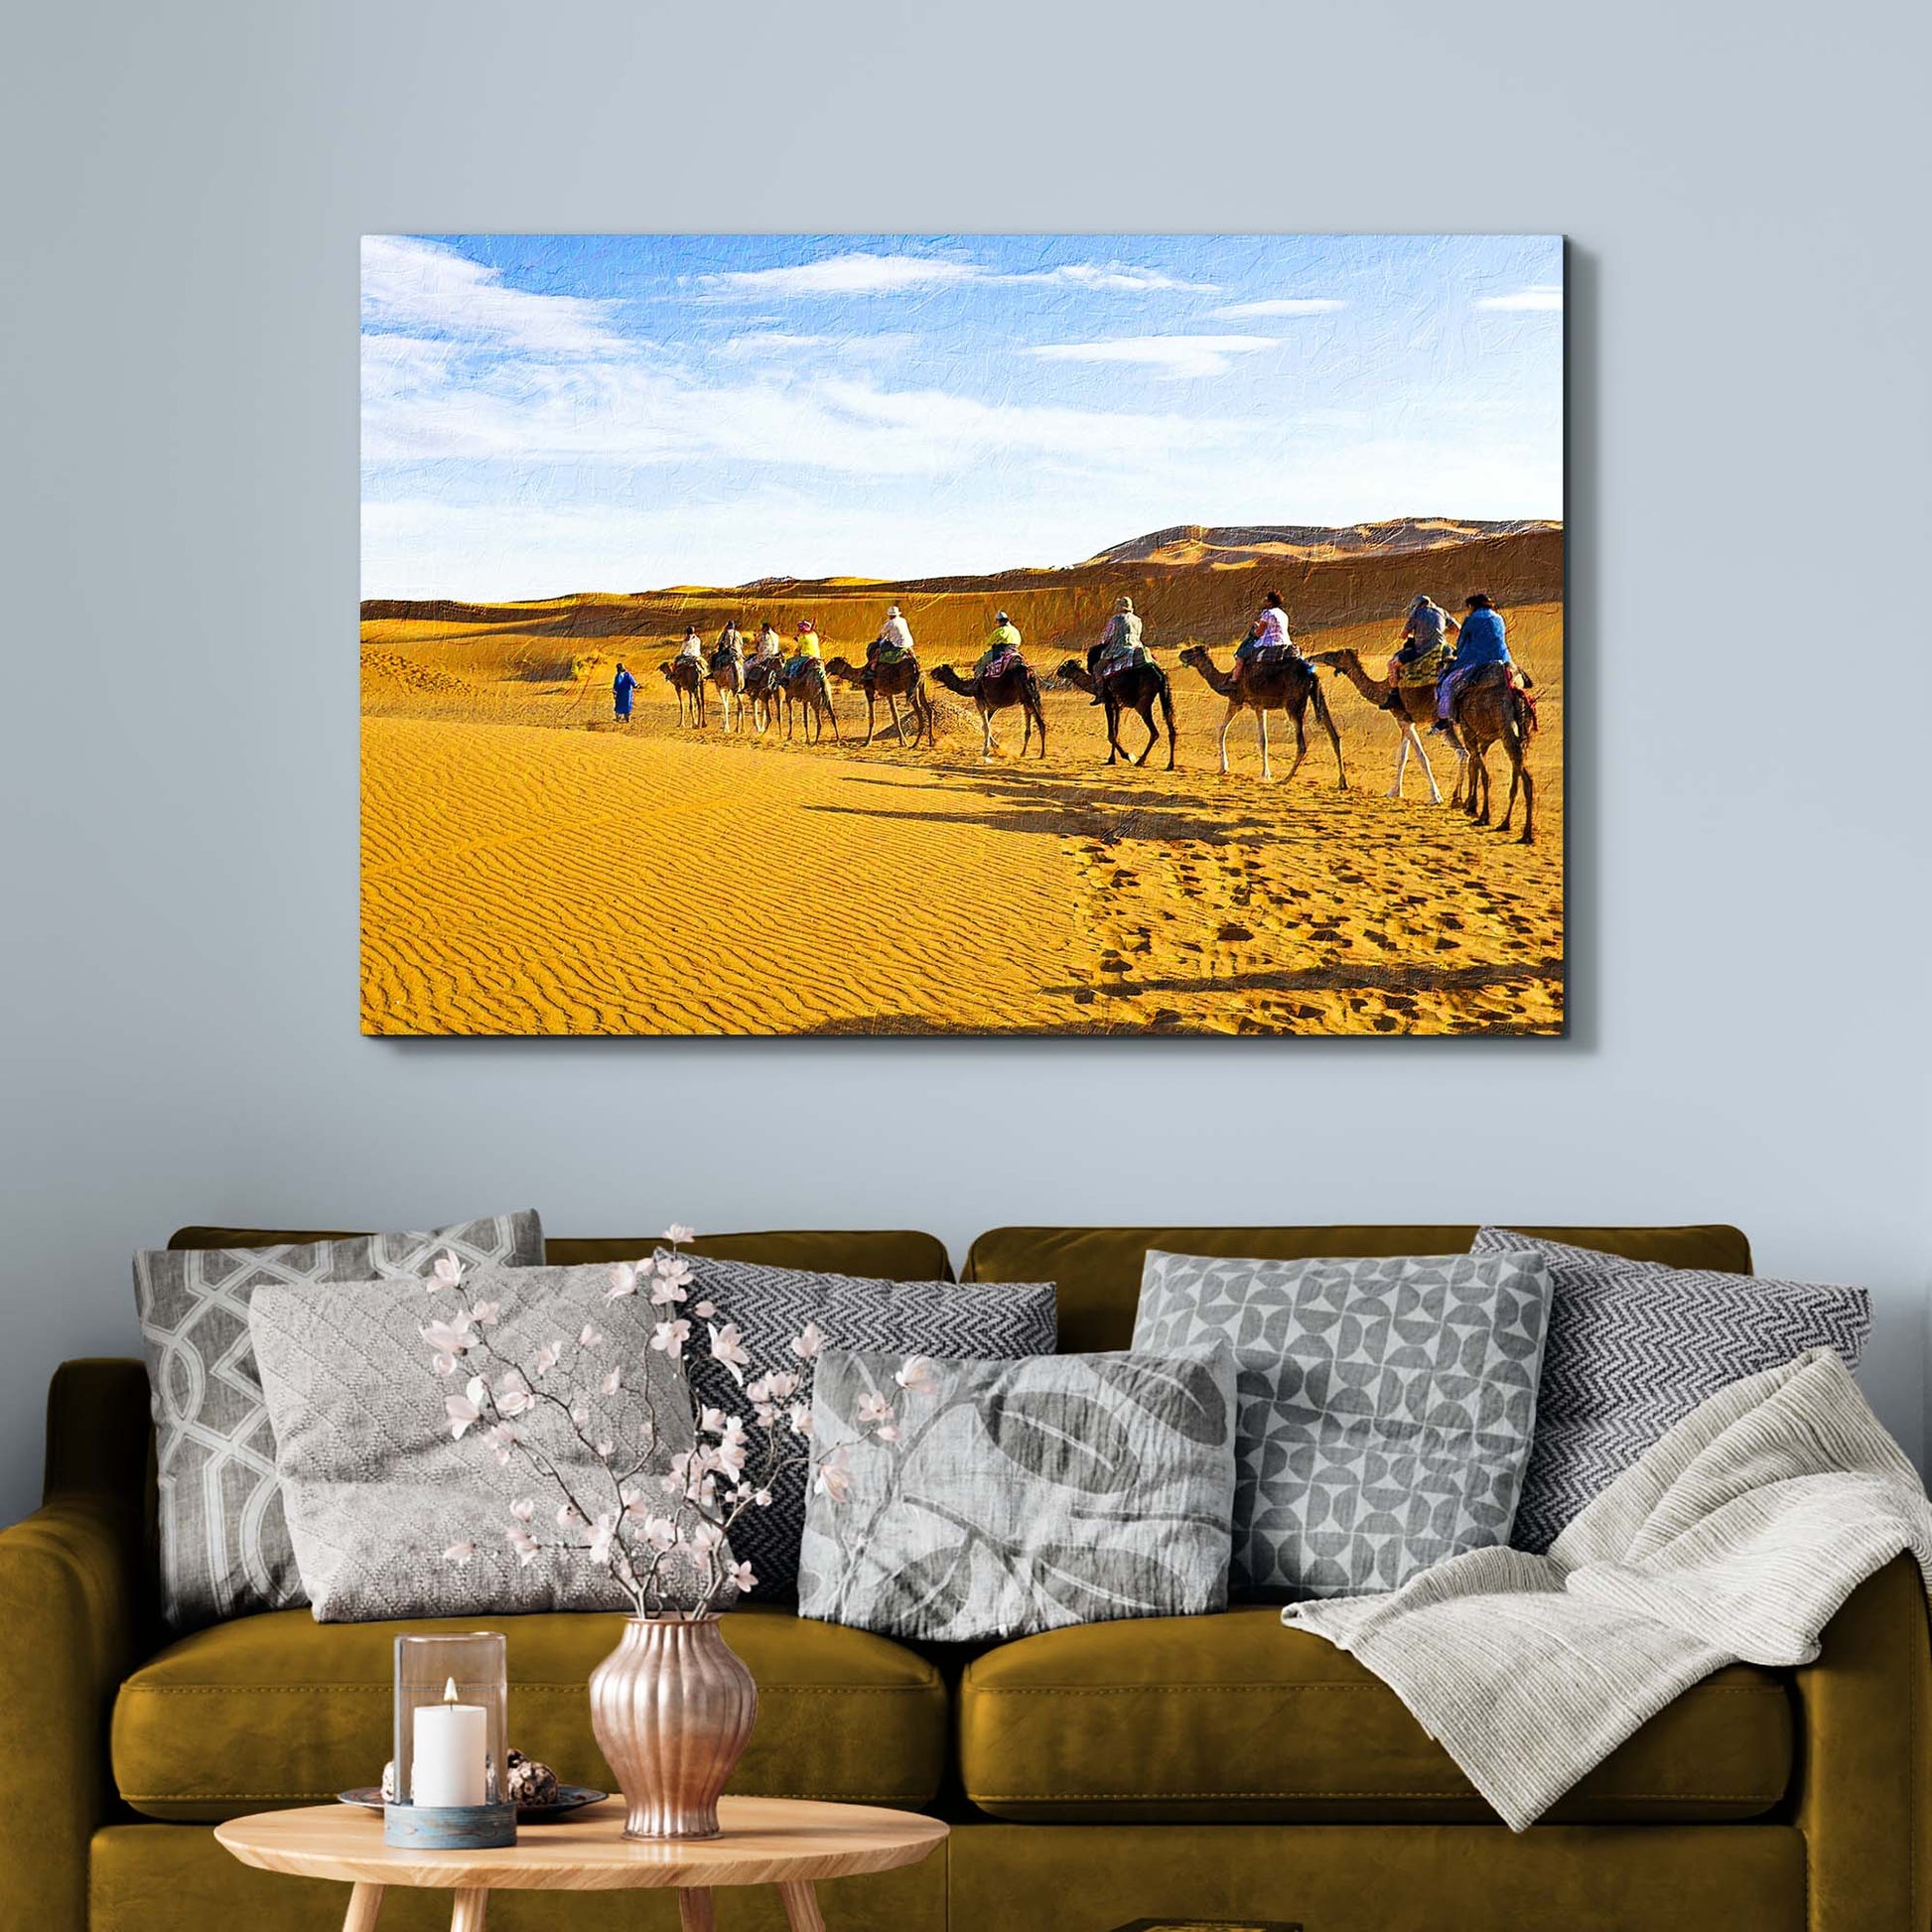 Camel Through Sand Dunes Canvas Wall Art Style 2 - Image by Tailored Canvases